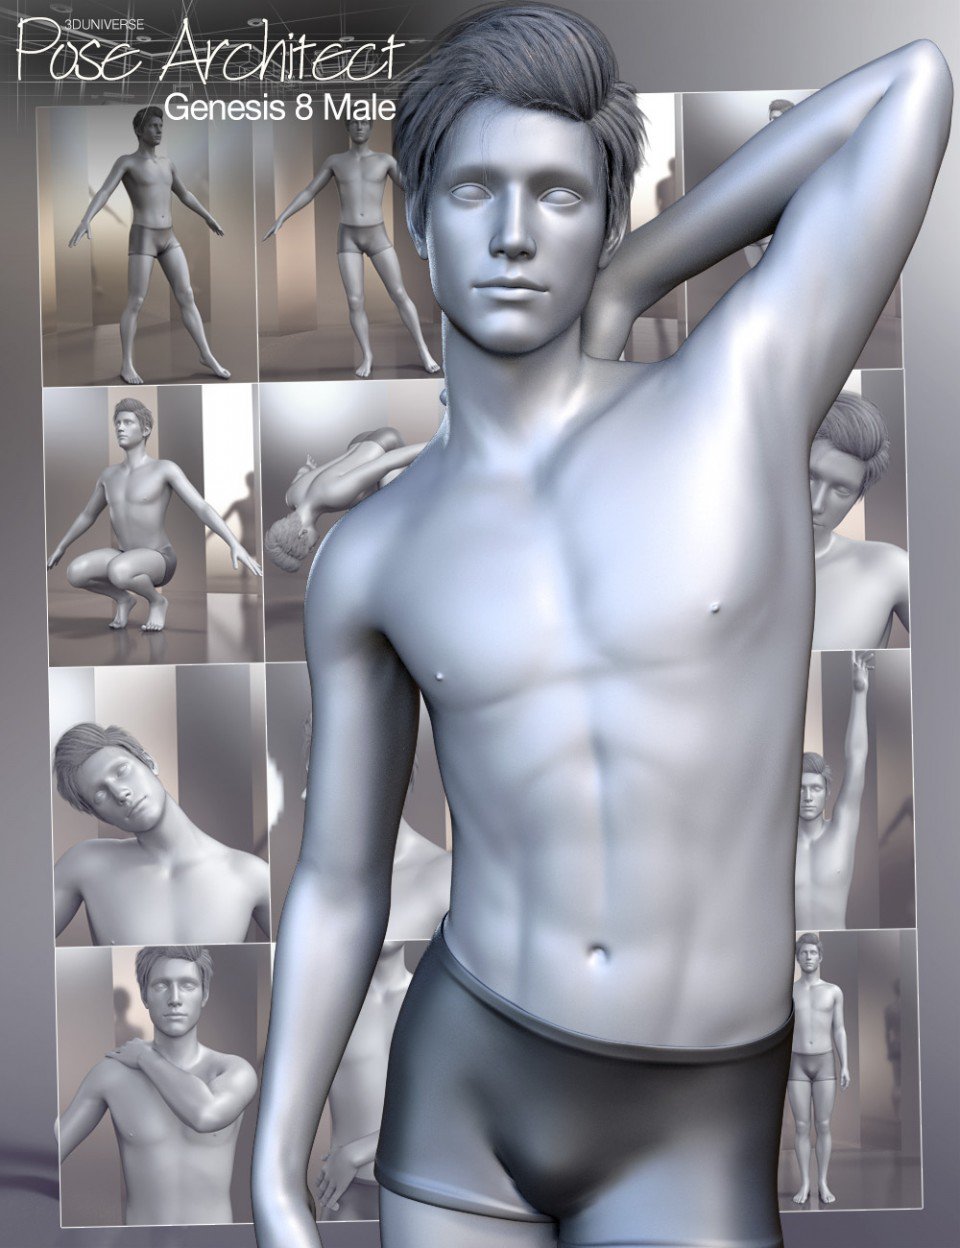 pose-architect-for-genesis-8-male(s)